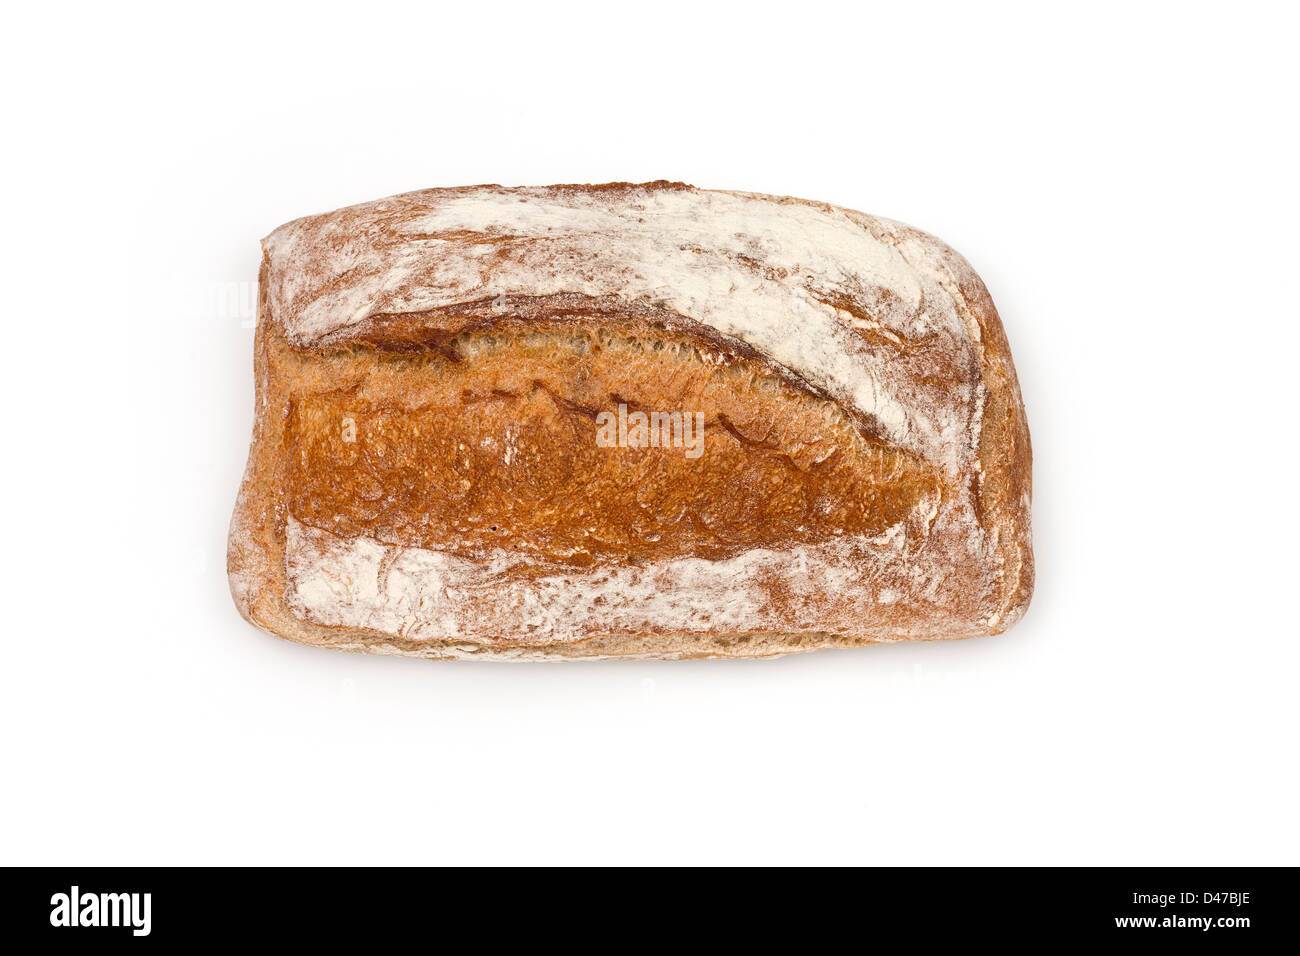 A loaf of rustic bread, photographed on  a white background (Jouannet firm at Vichy - France). Pain en studio sur fond blanc. Stock Photo